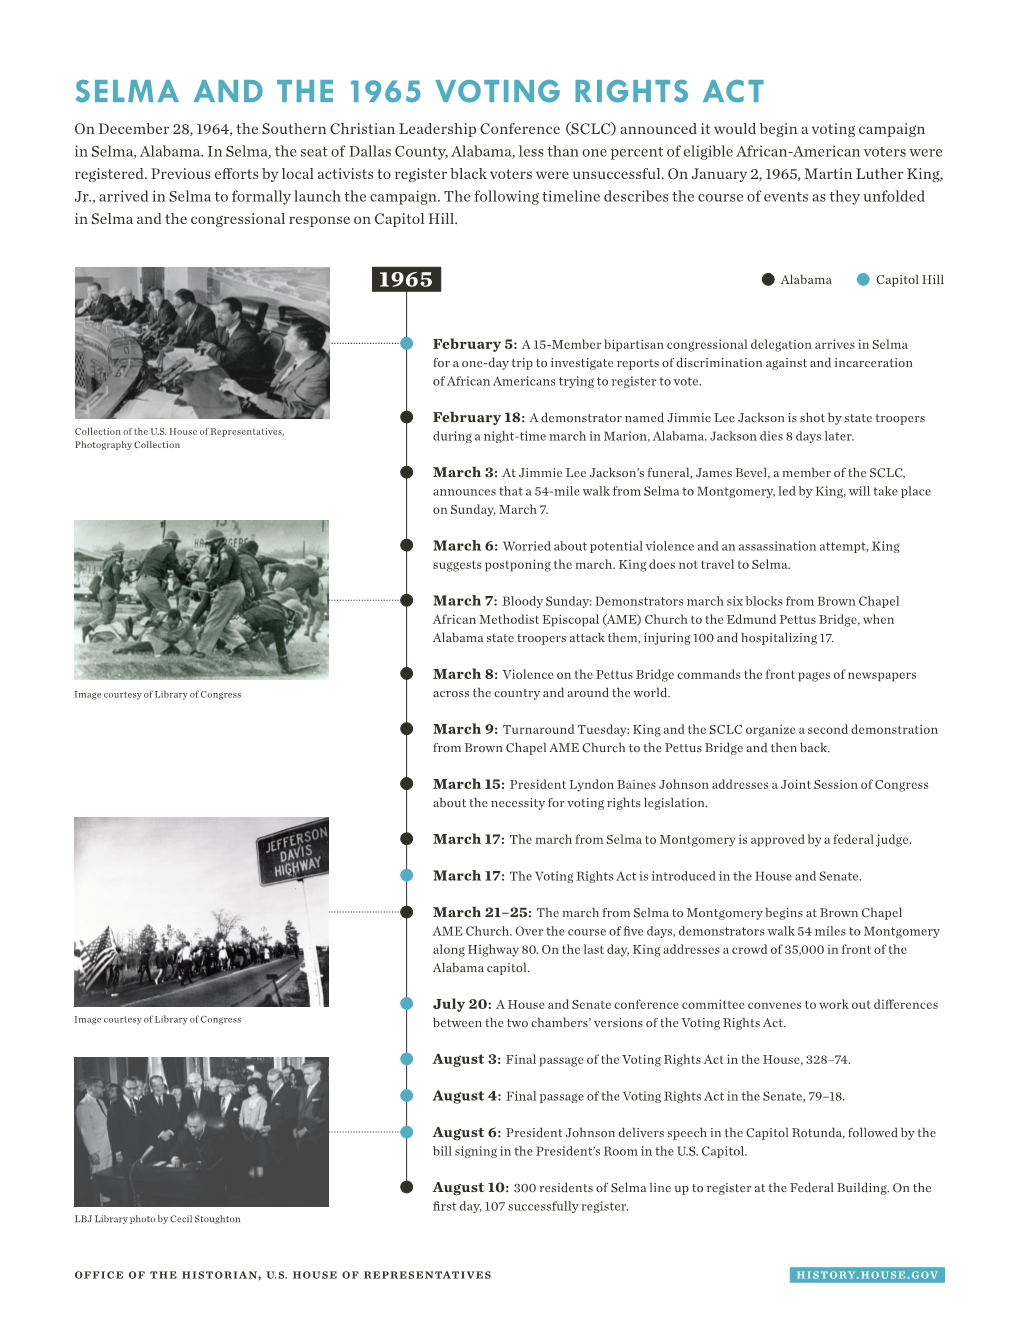 Timeline: Selma and the 1965 Voting Rights